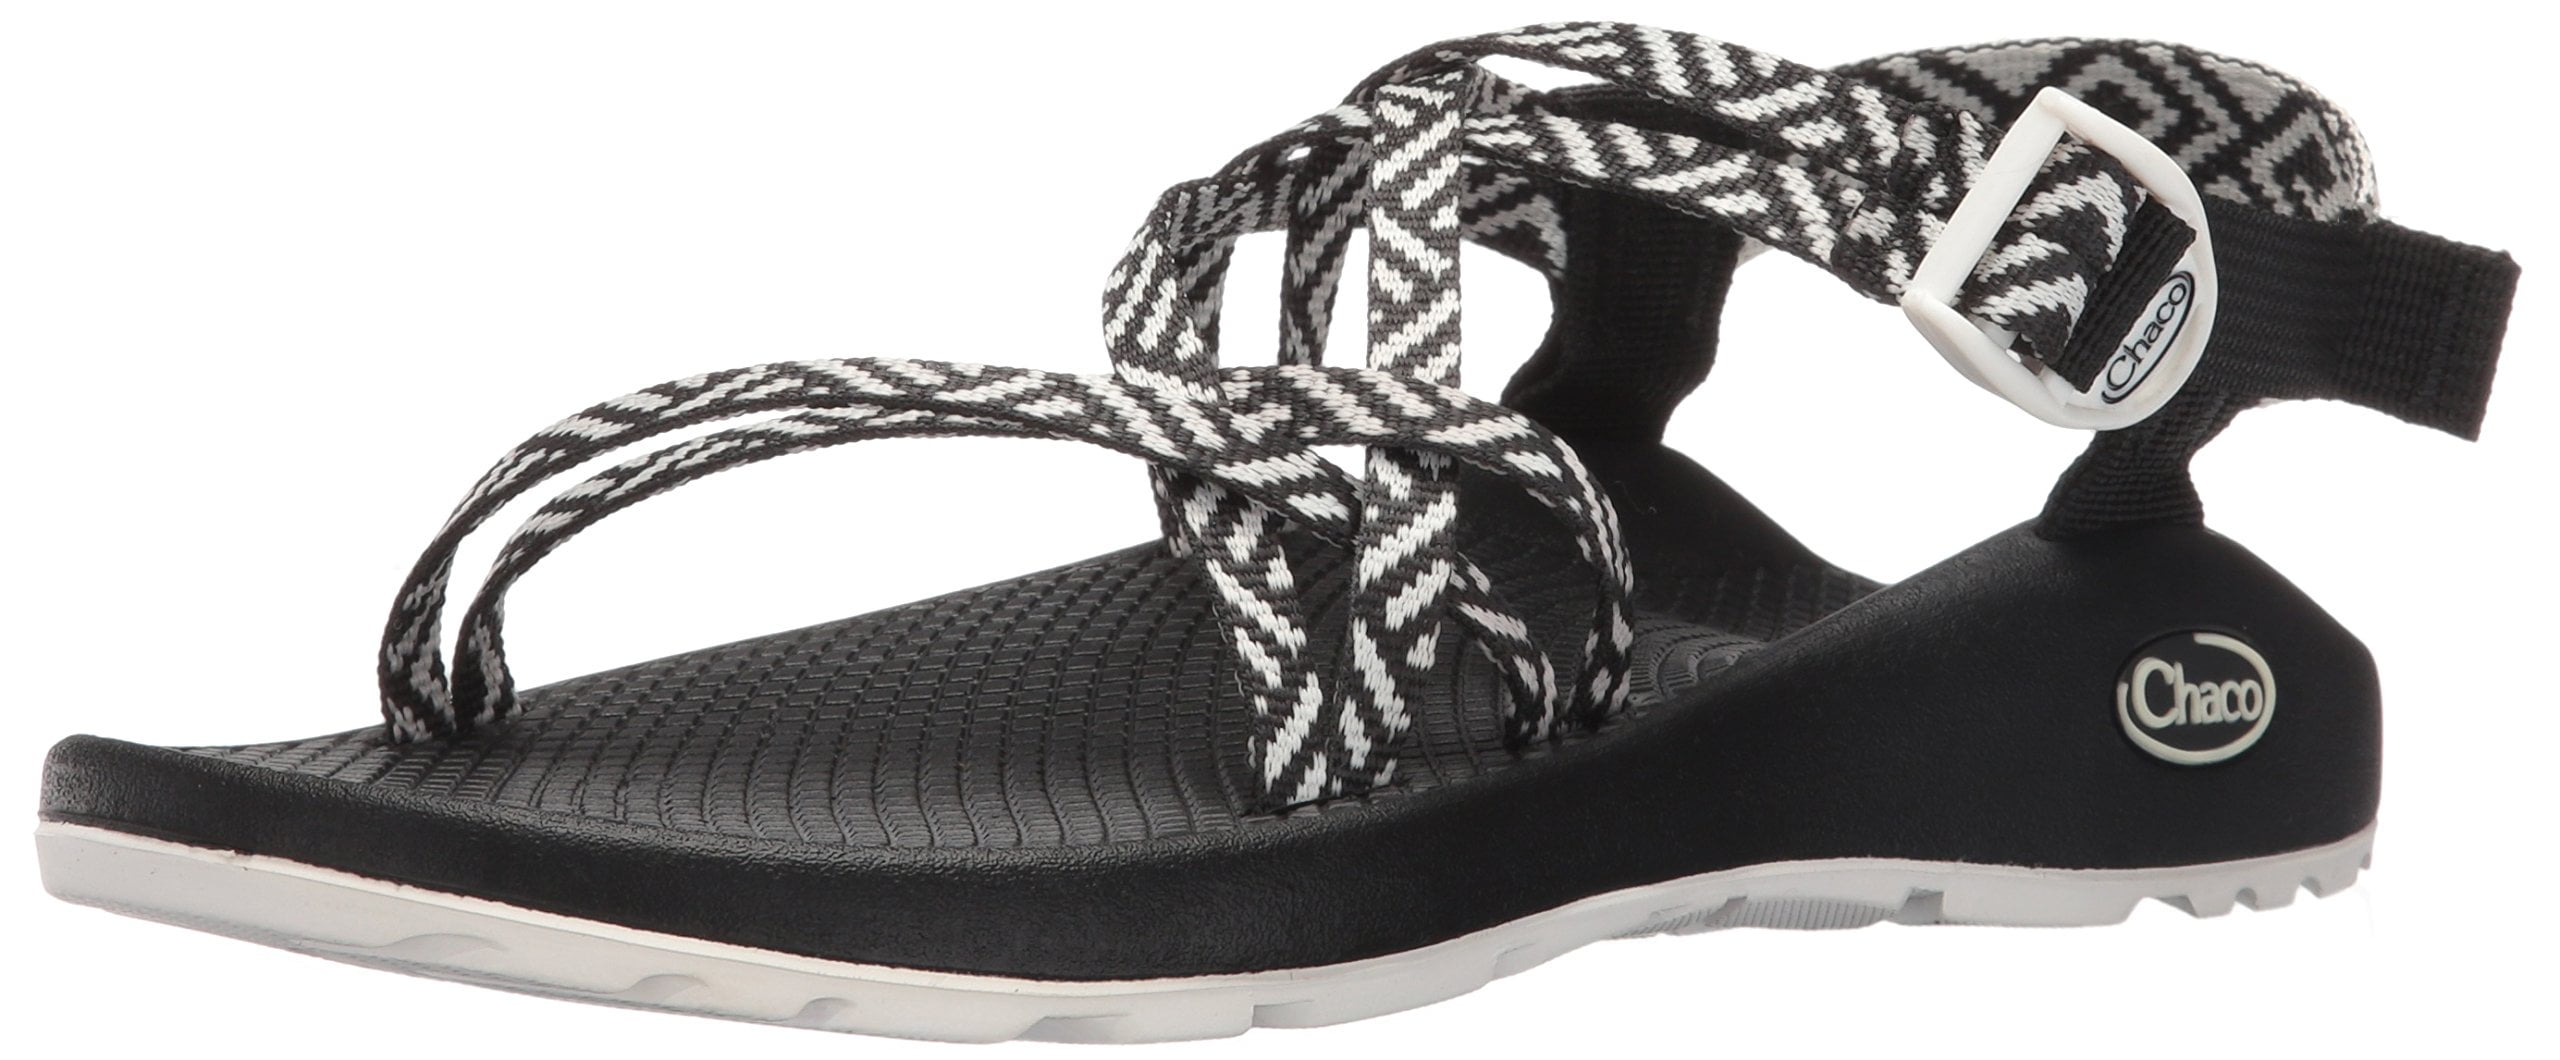 Buy > chaco sandals no back strap > in stock